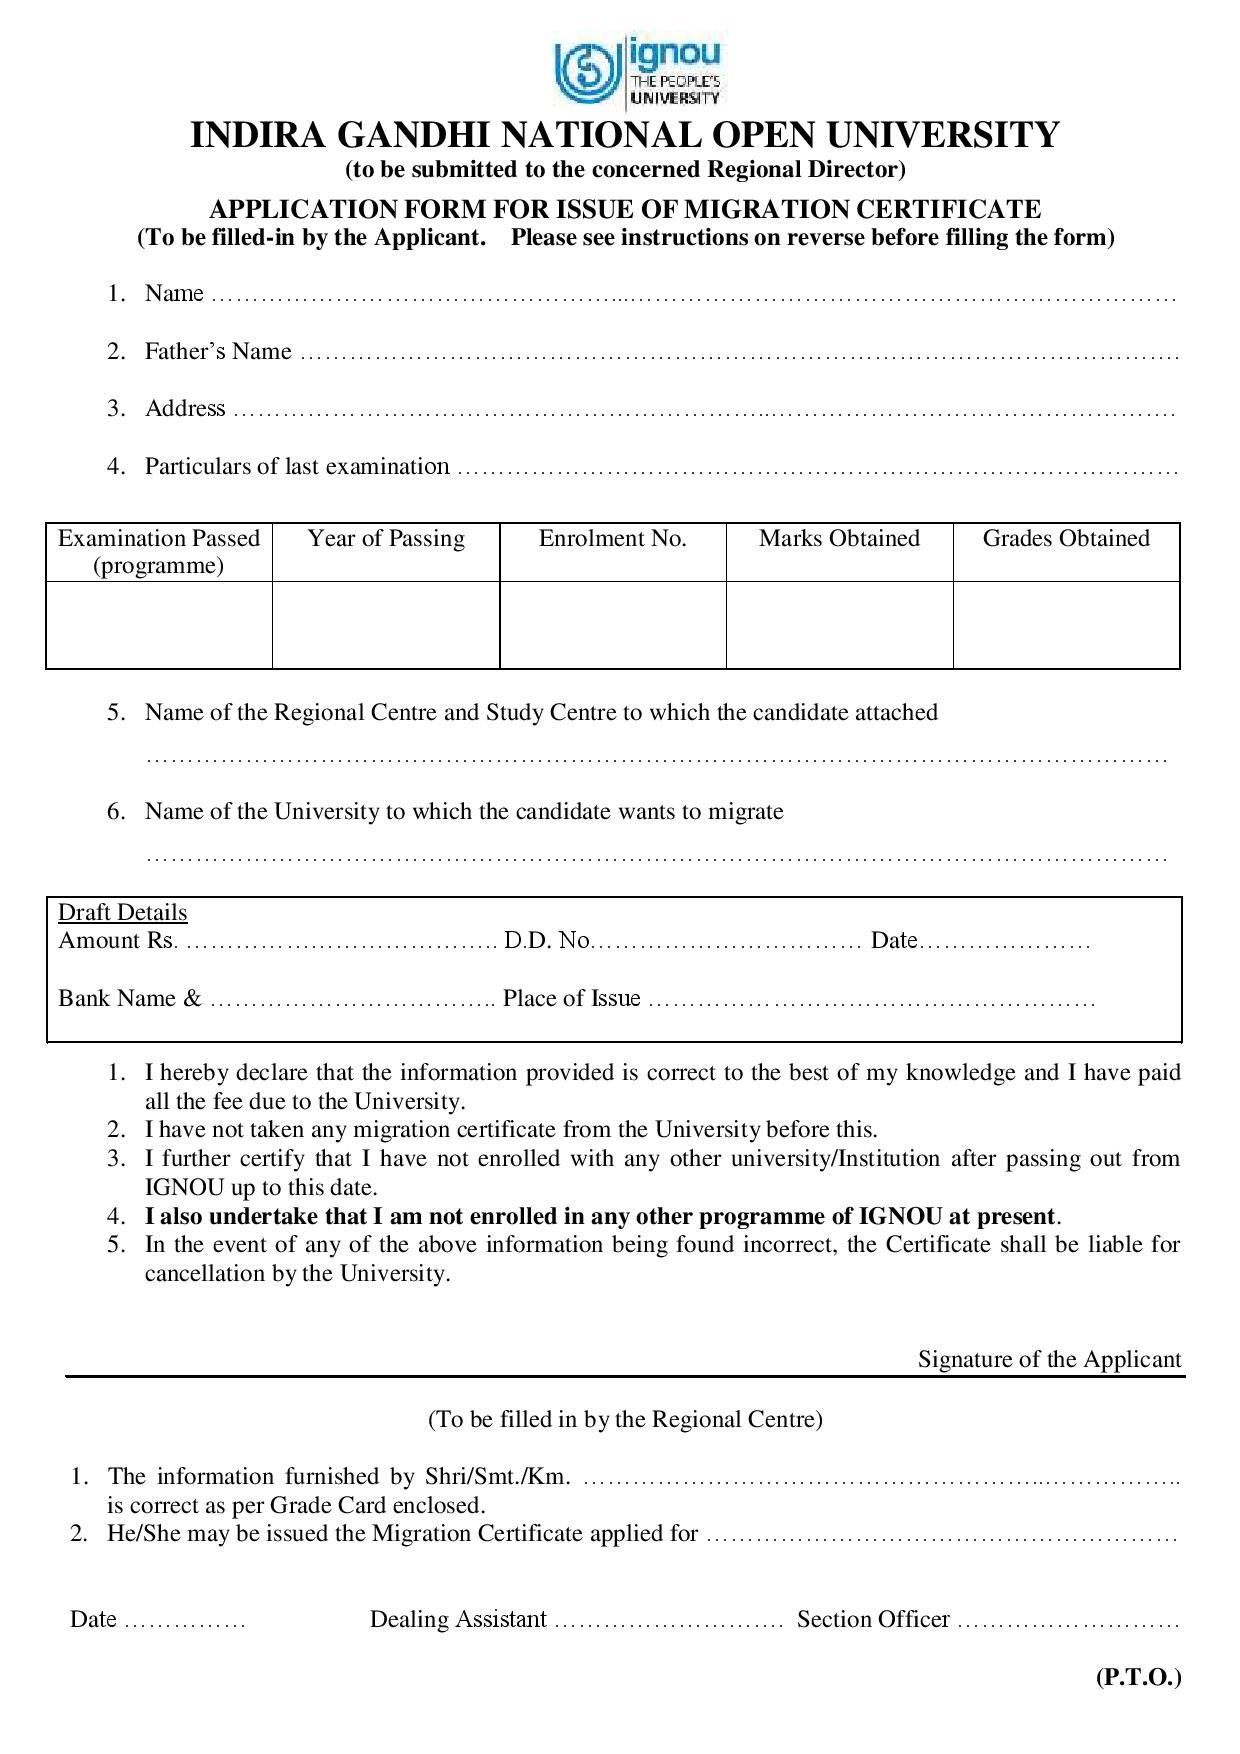 How to Write Application Form IGNOU Migration Certificate?